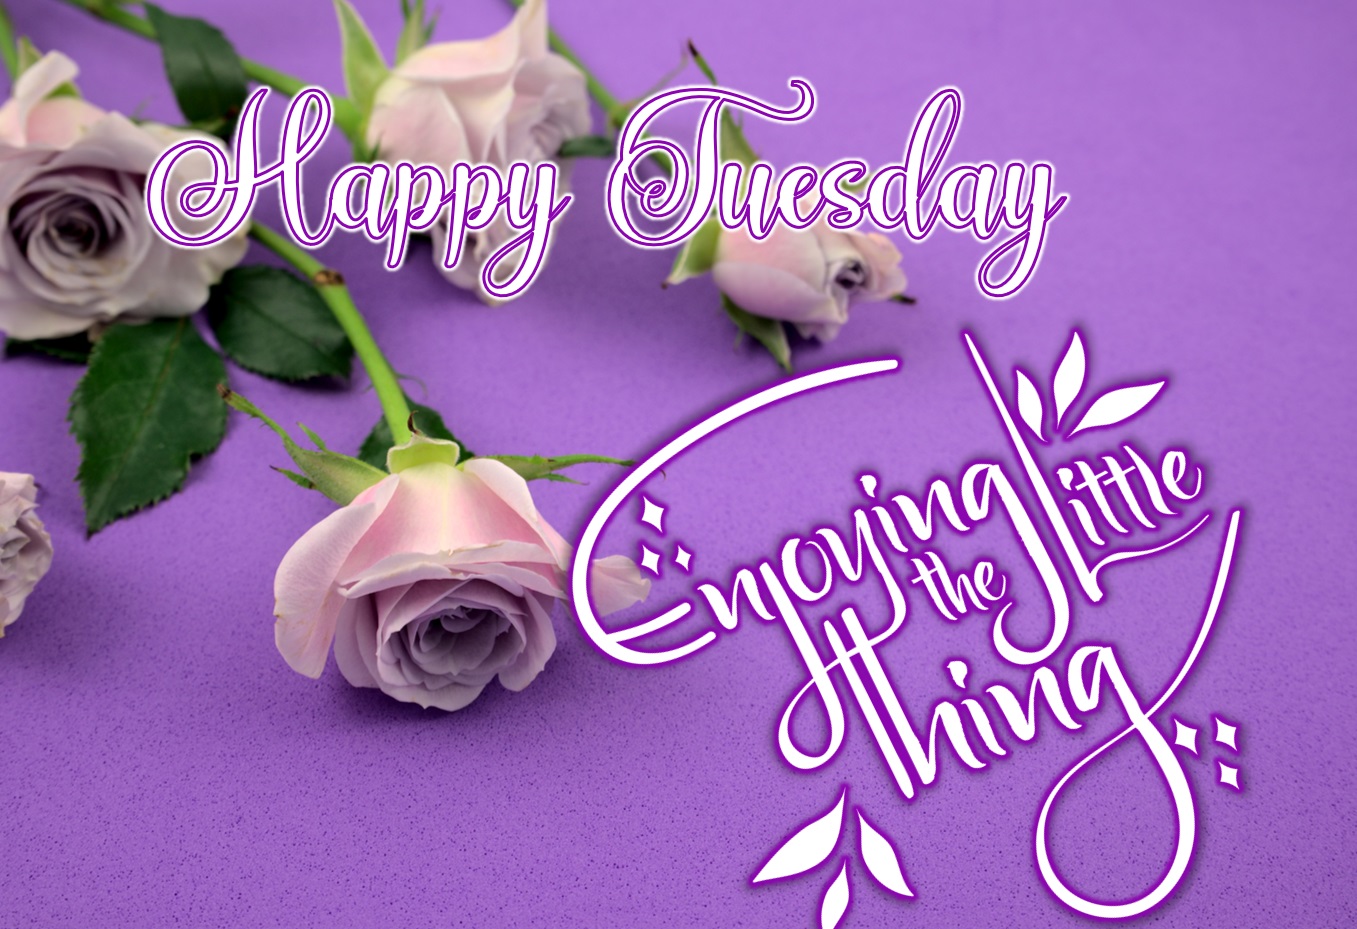 Beautiful Happy Tuesday images. Superbwishes.com